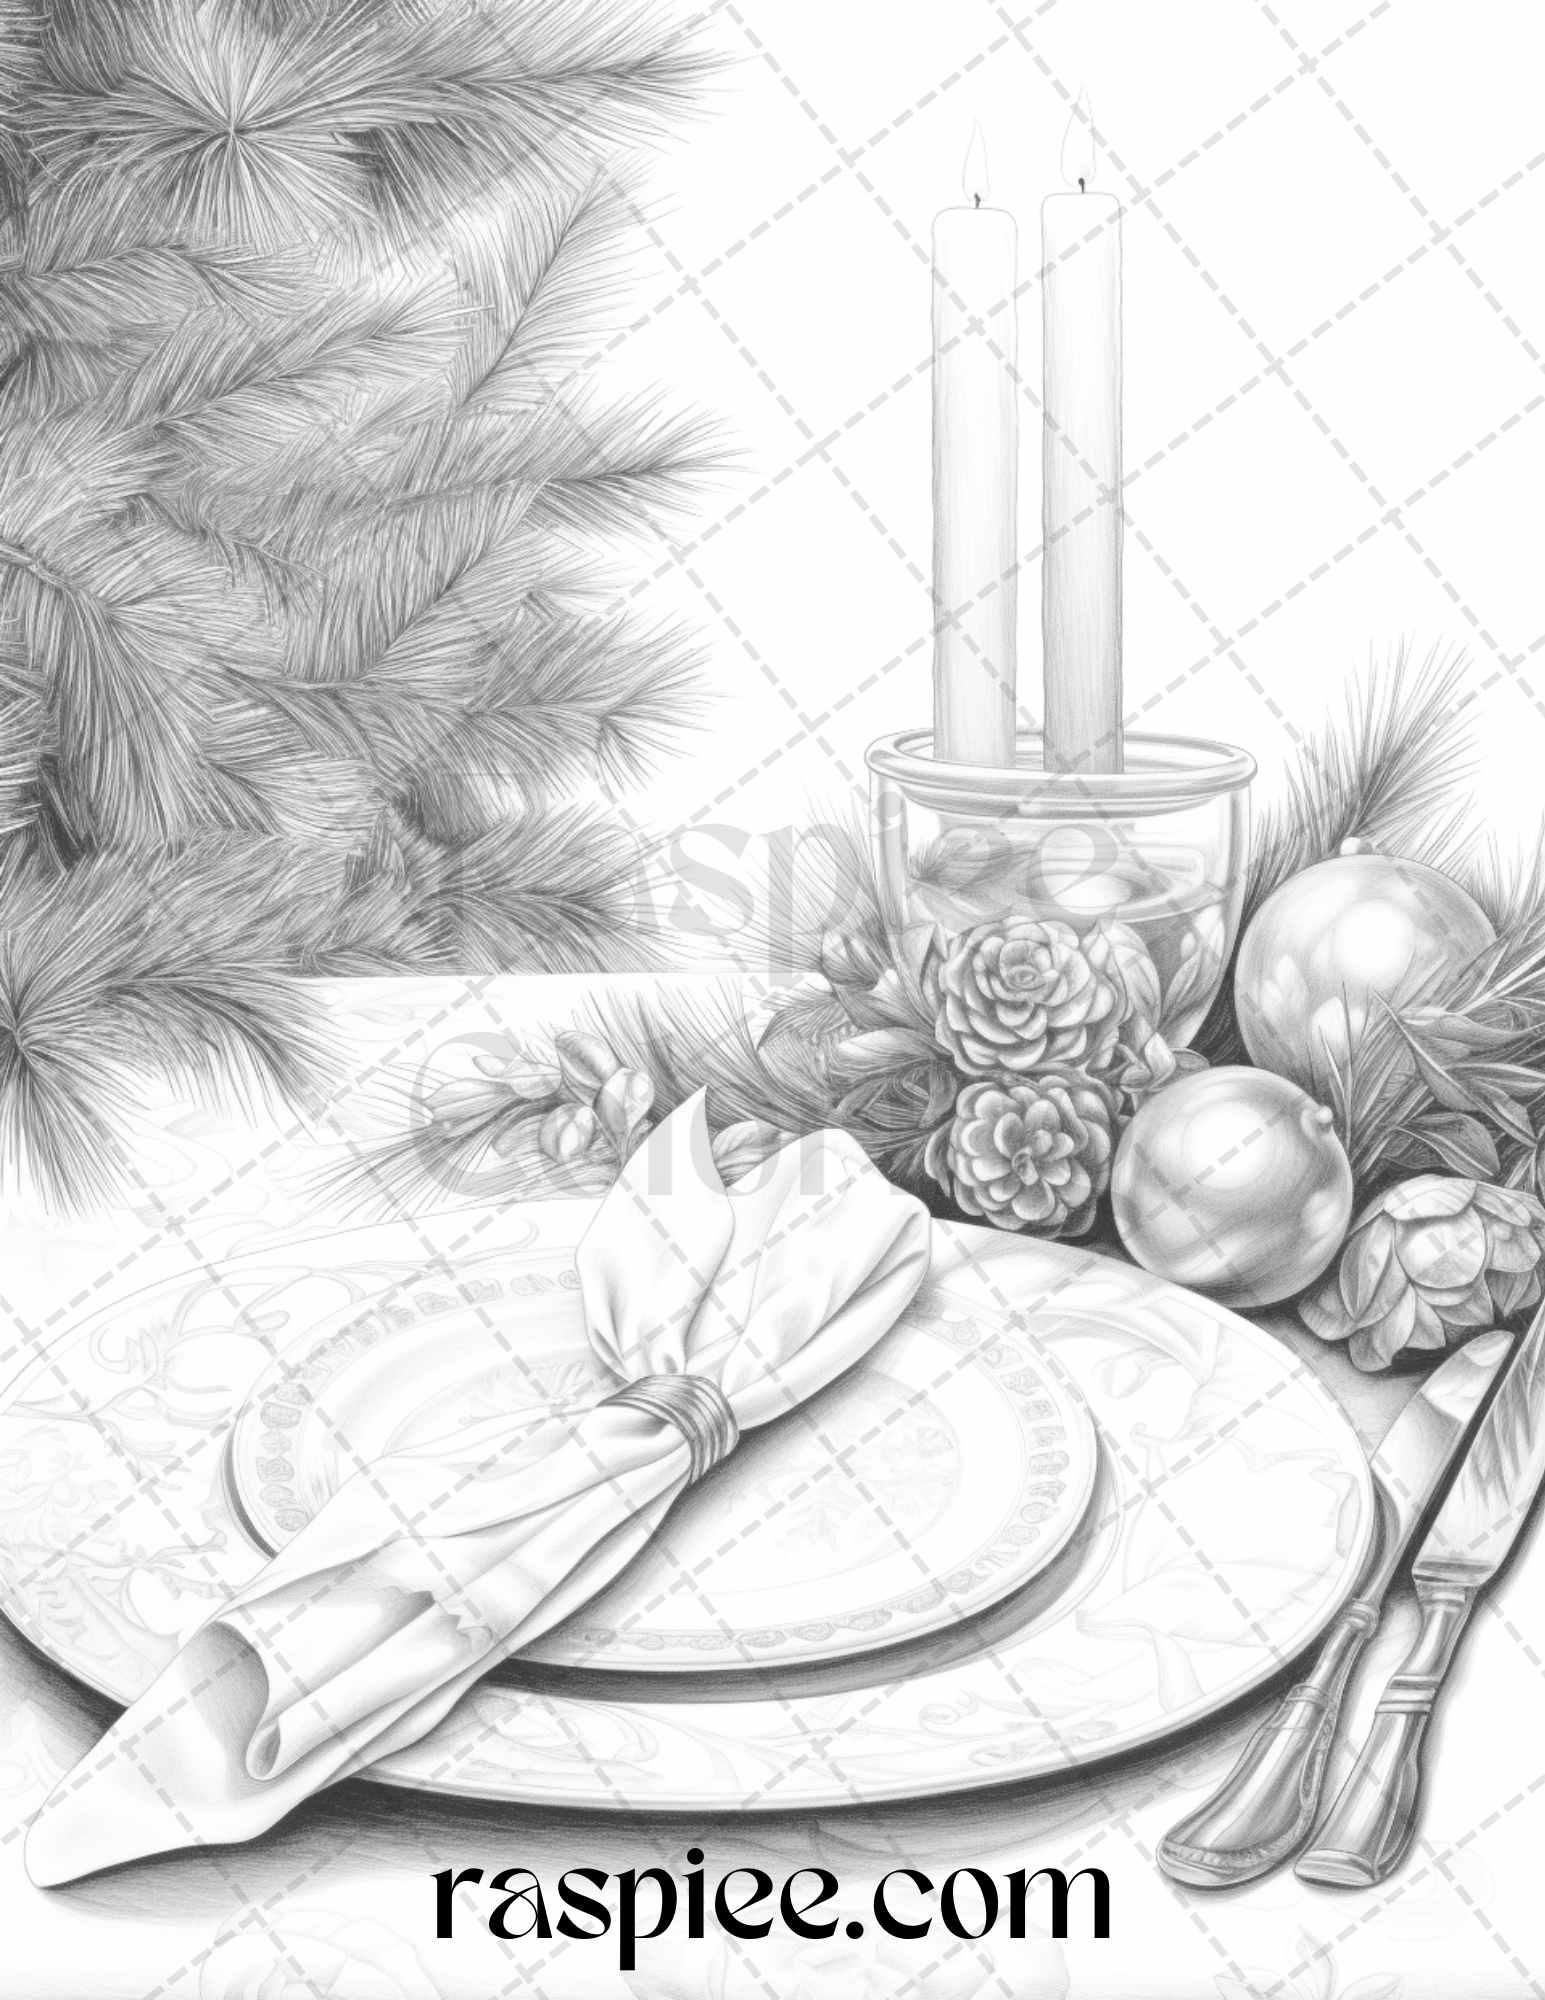 Christmas decoration grayscale coloring page, Adult printable coloring page, Festive holiday coloring pattern, Christmas ornaments coloring image, Xmas coloring design for adults